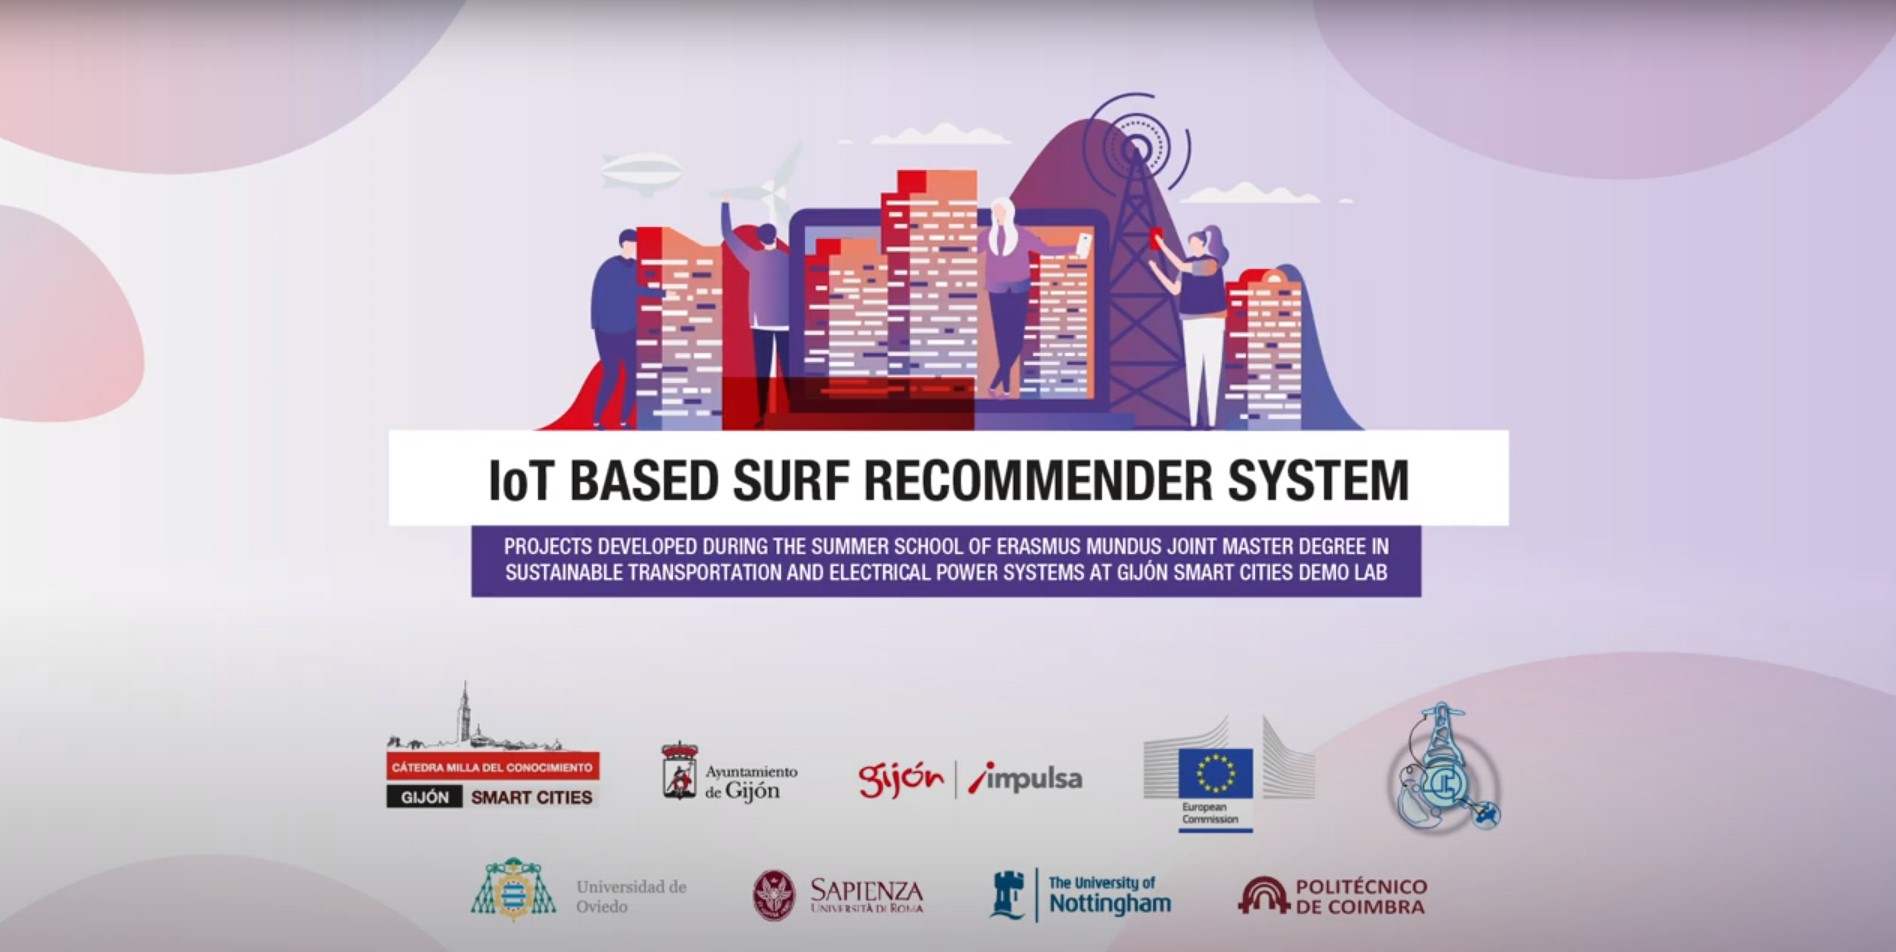 IoT based Surf Recommender System